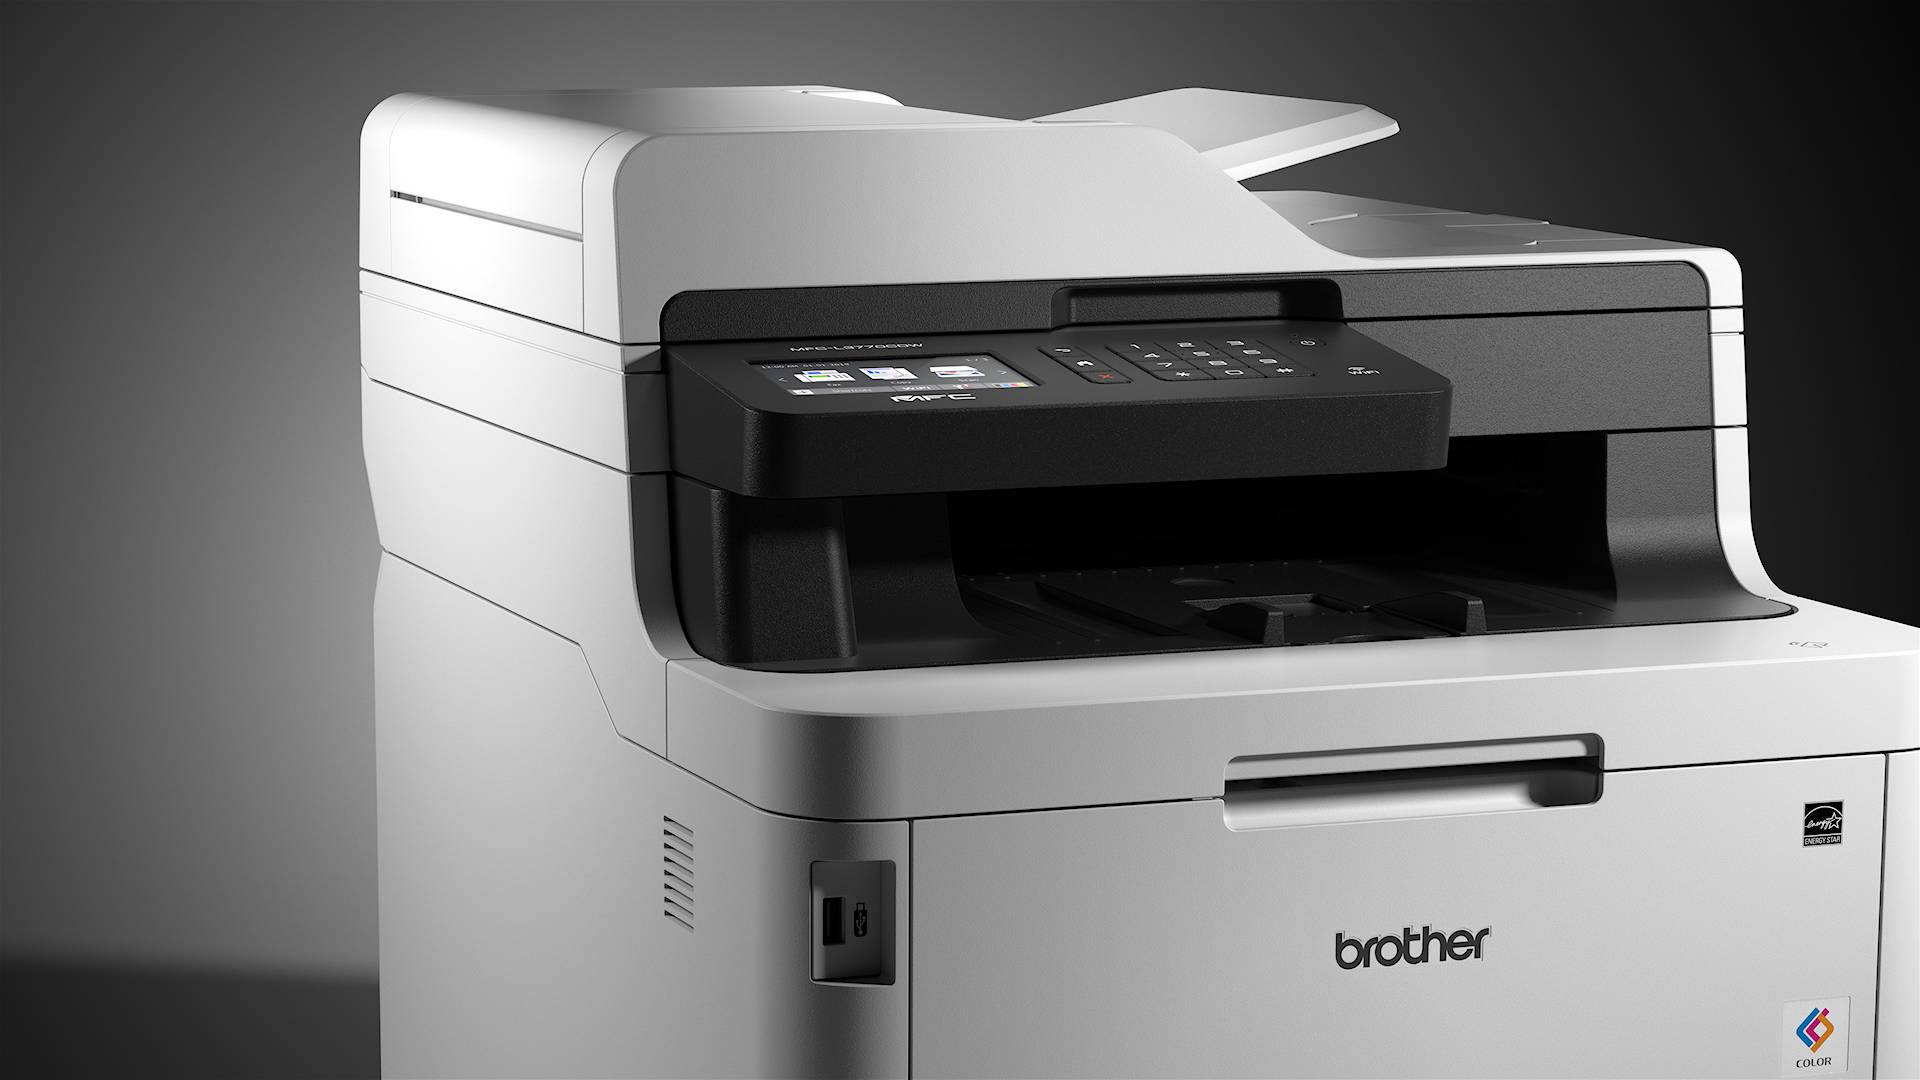 Brother printer front product image.